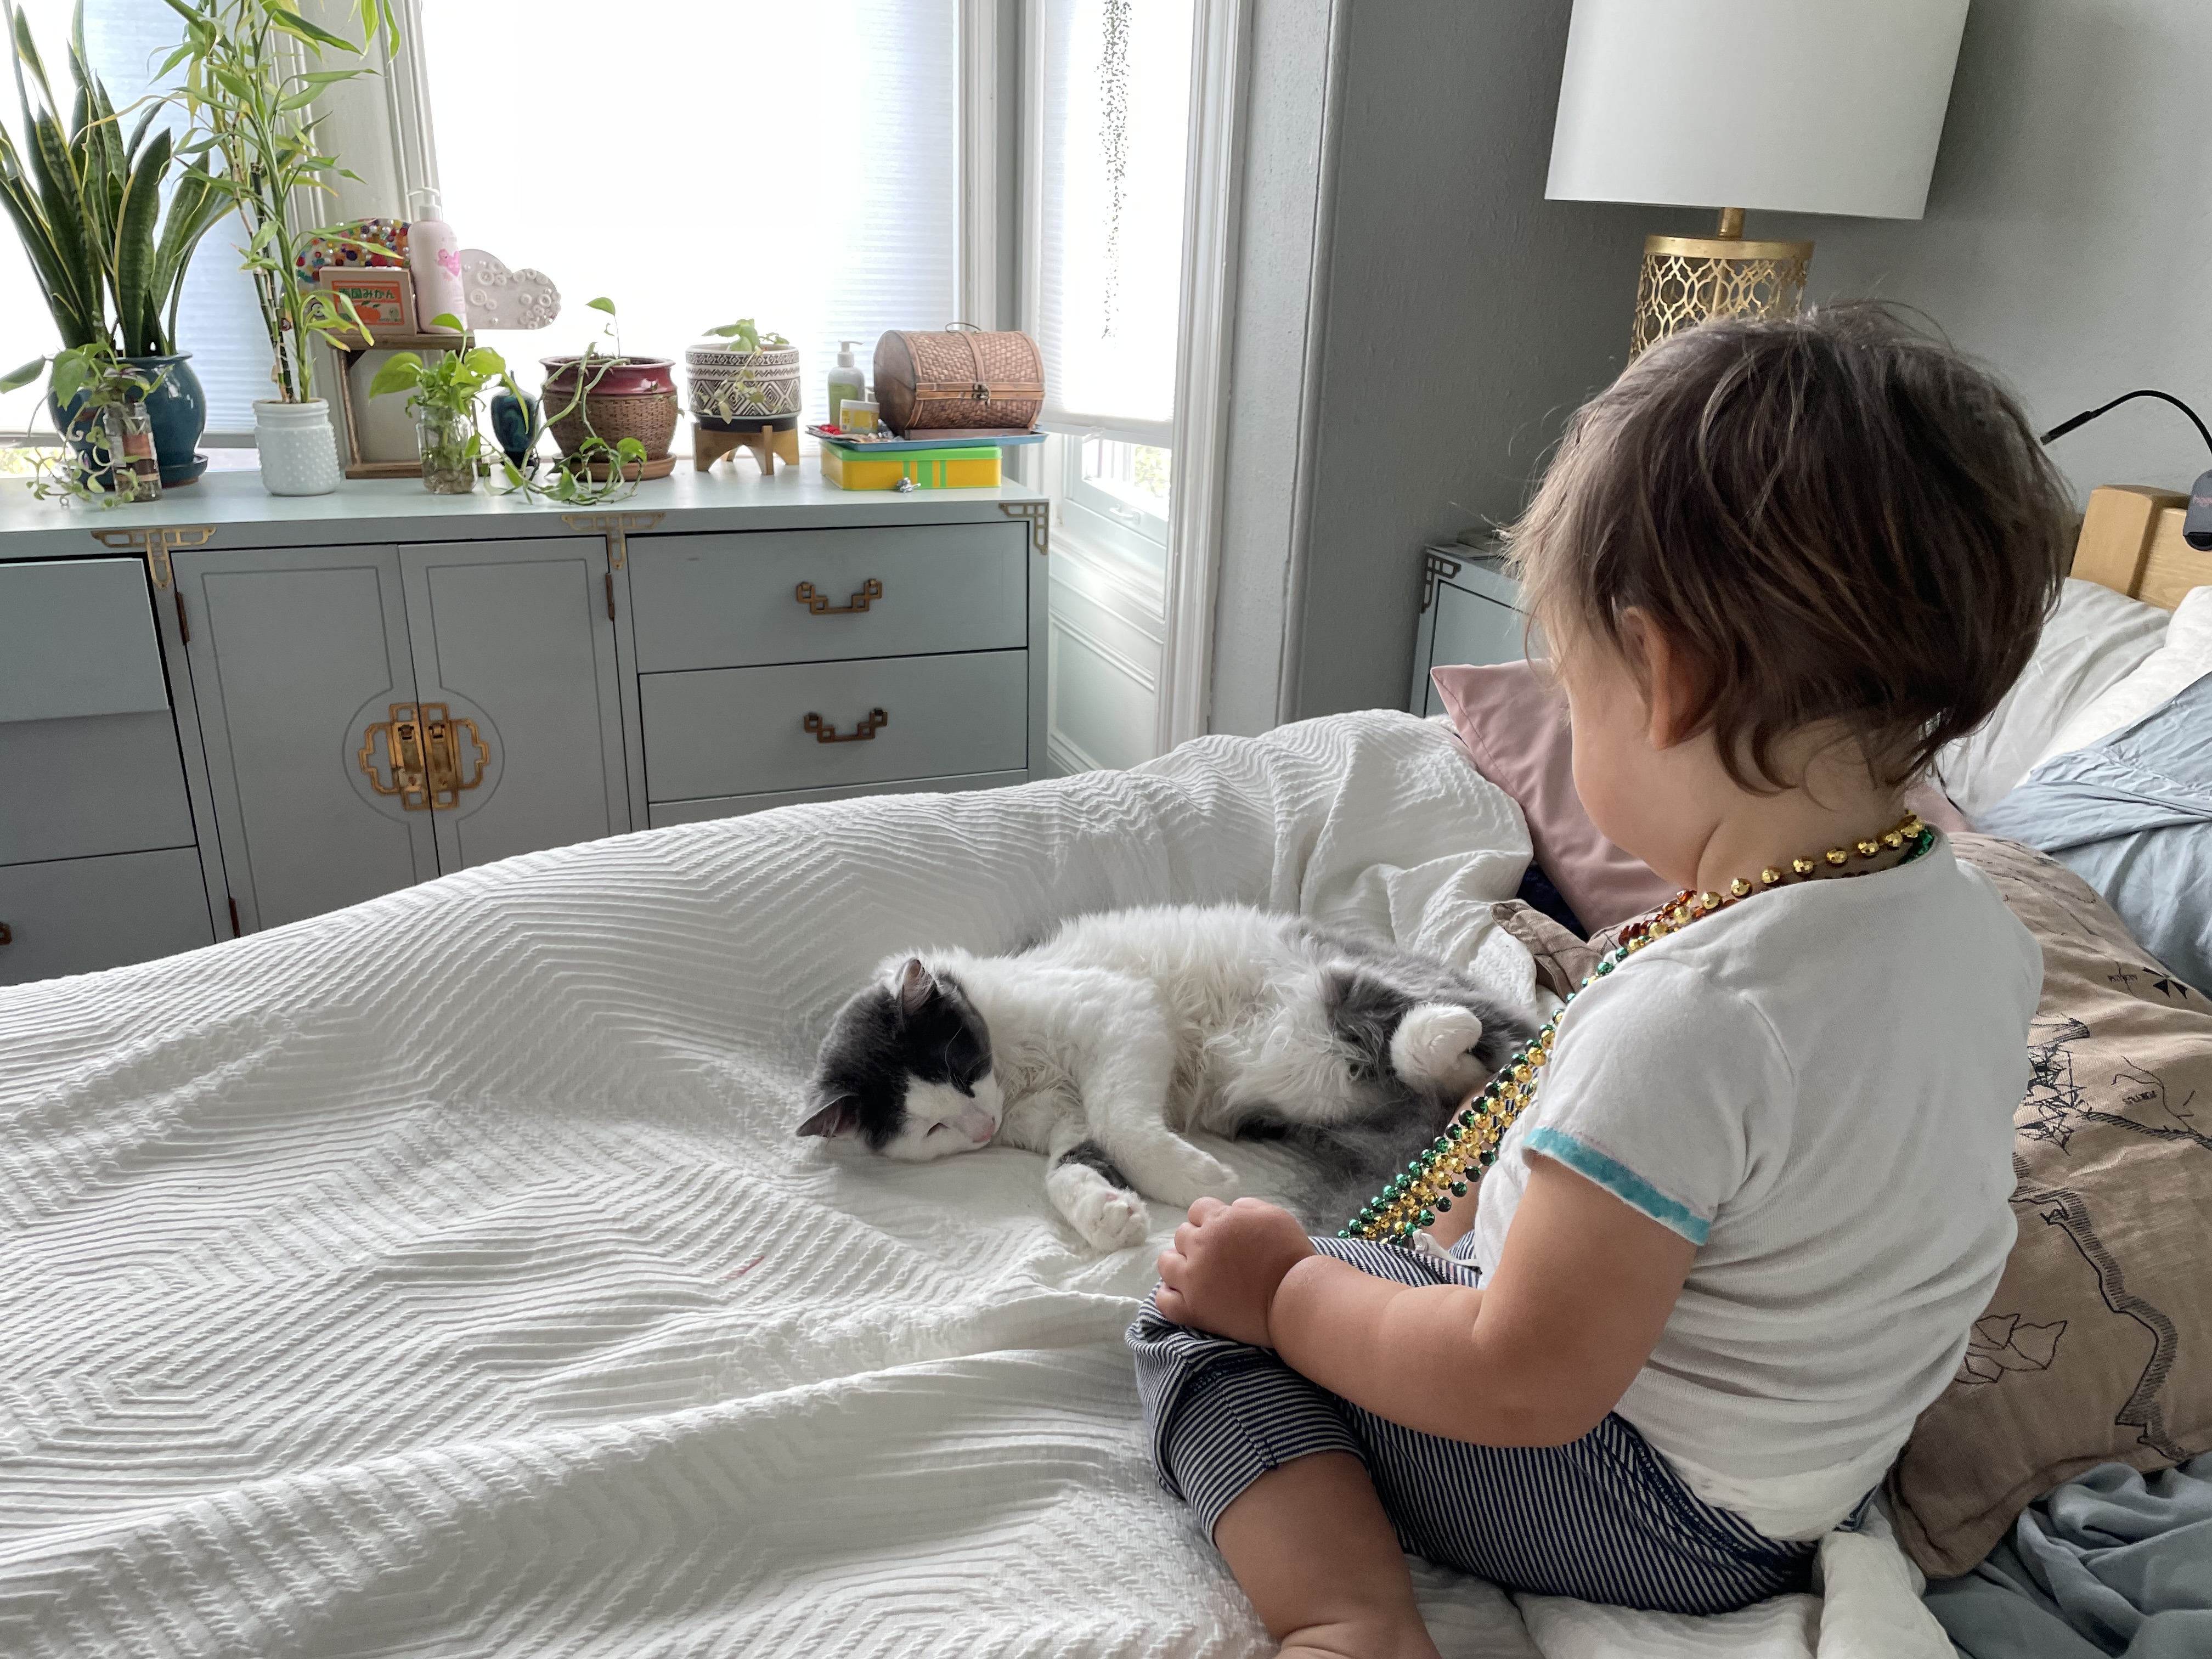 A grey and white kitten on a bed with a toddler